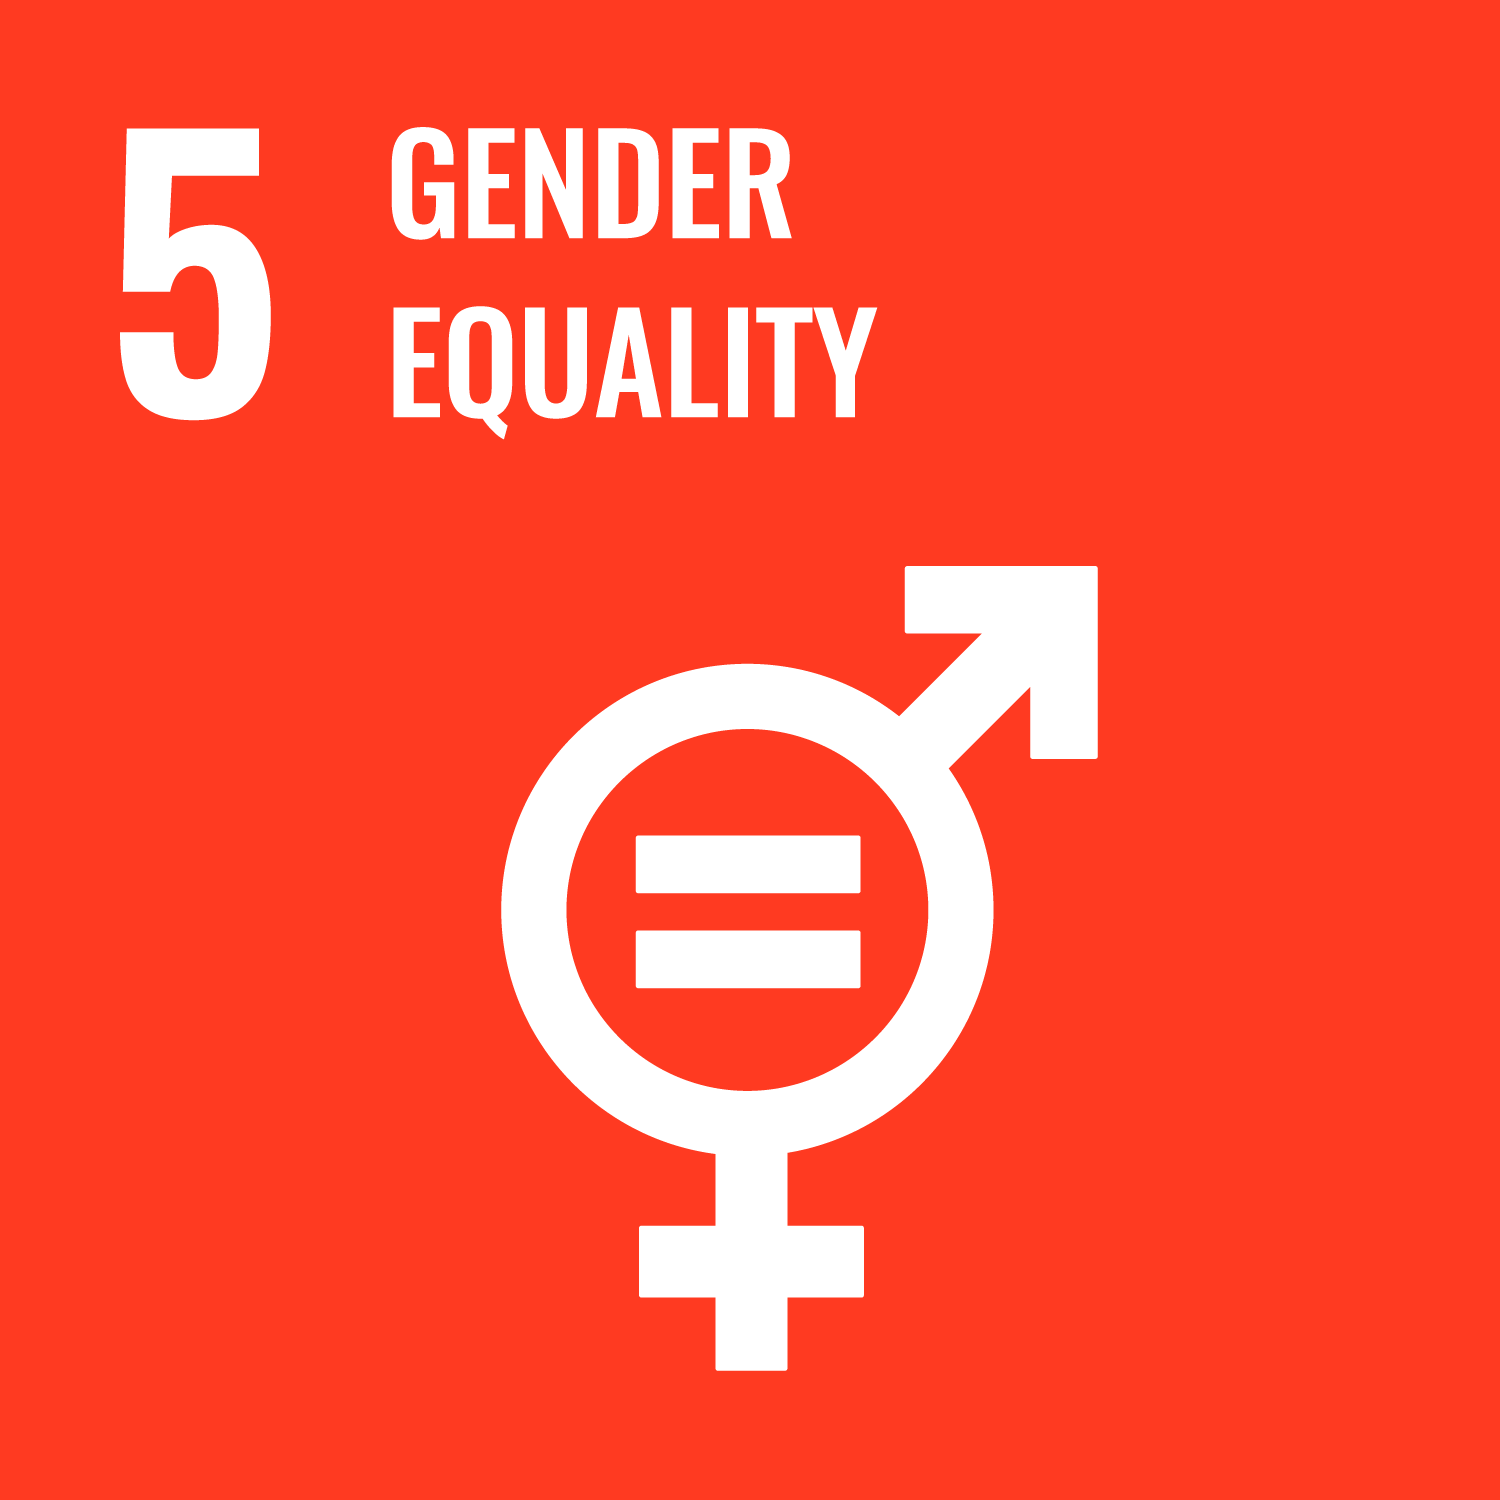 The official logo of the United Nations Sustainable Development Goal #5: Gender equality.